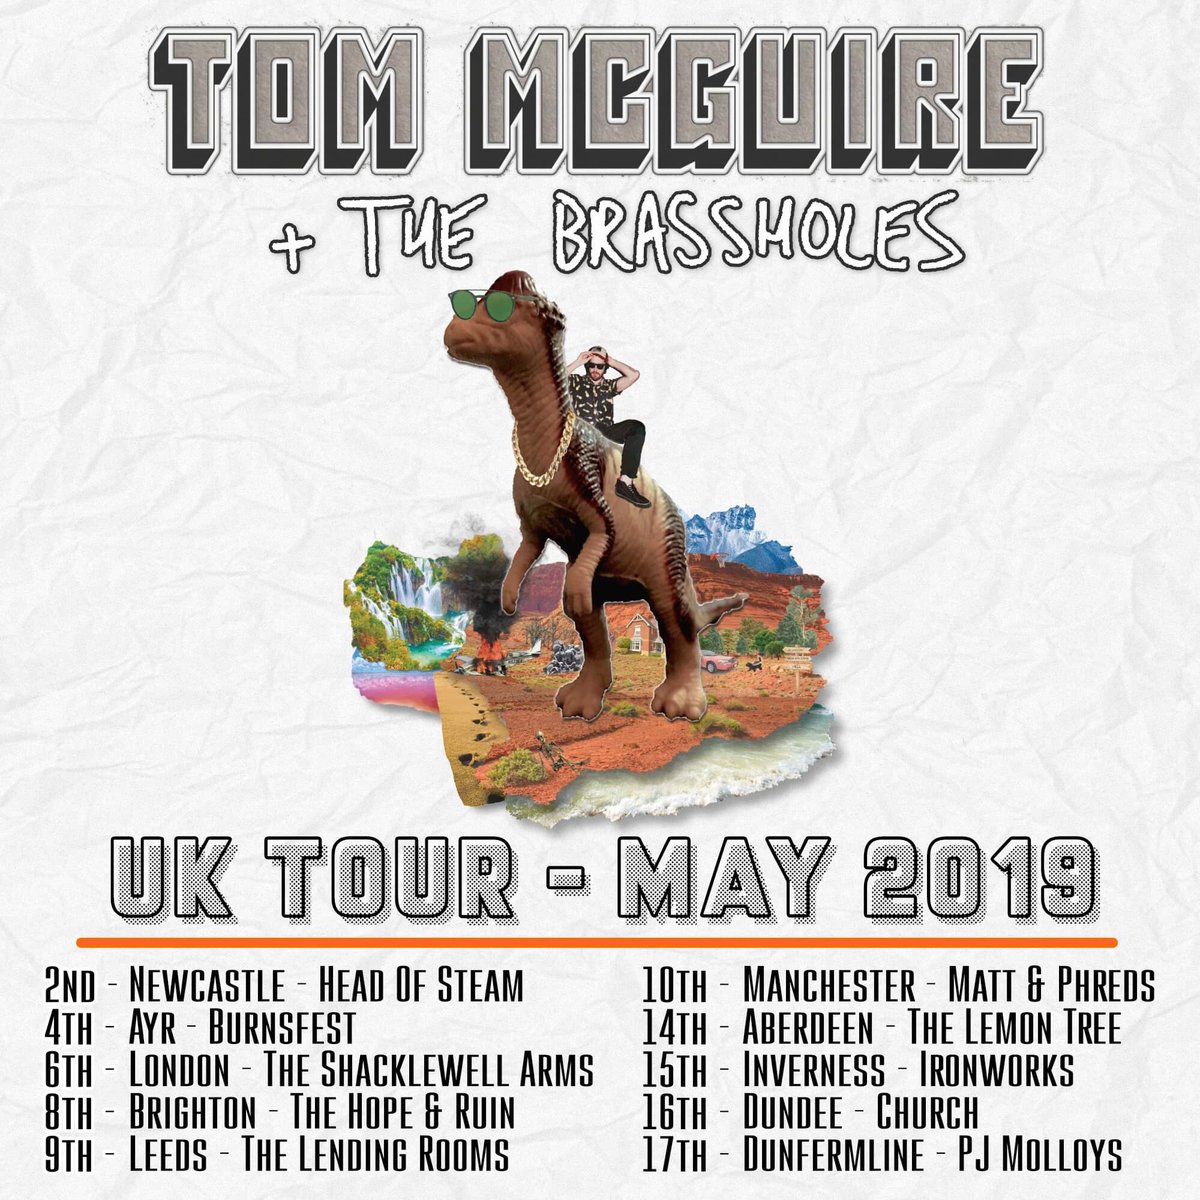 We are excited to announce our upcoming world domination tour of the u.k in May. Come and see us in a town near YOU! @HOS_Newcastle @thehopeandruin @TomLendingRoom @MattandPhreds @IronworksVenue @PJMolloys 

#brassholes #uktour #brassholestour #brassholesalbum